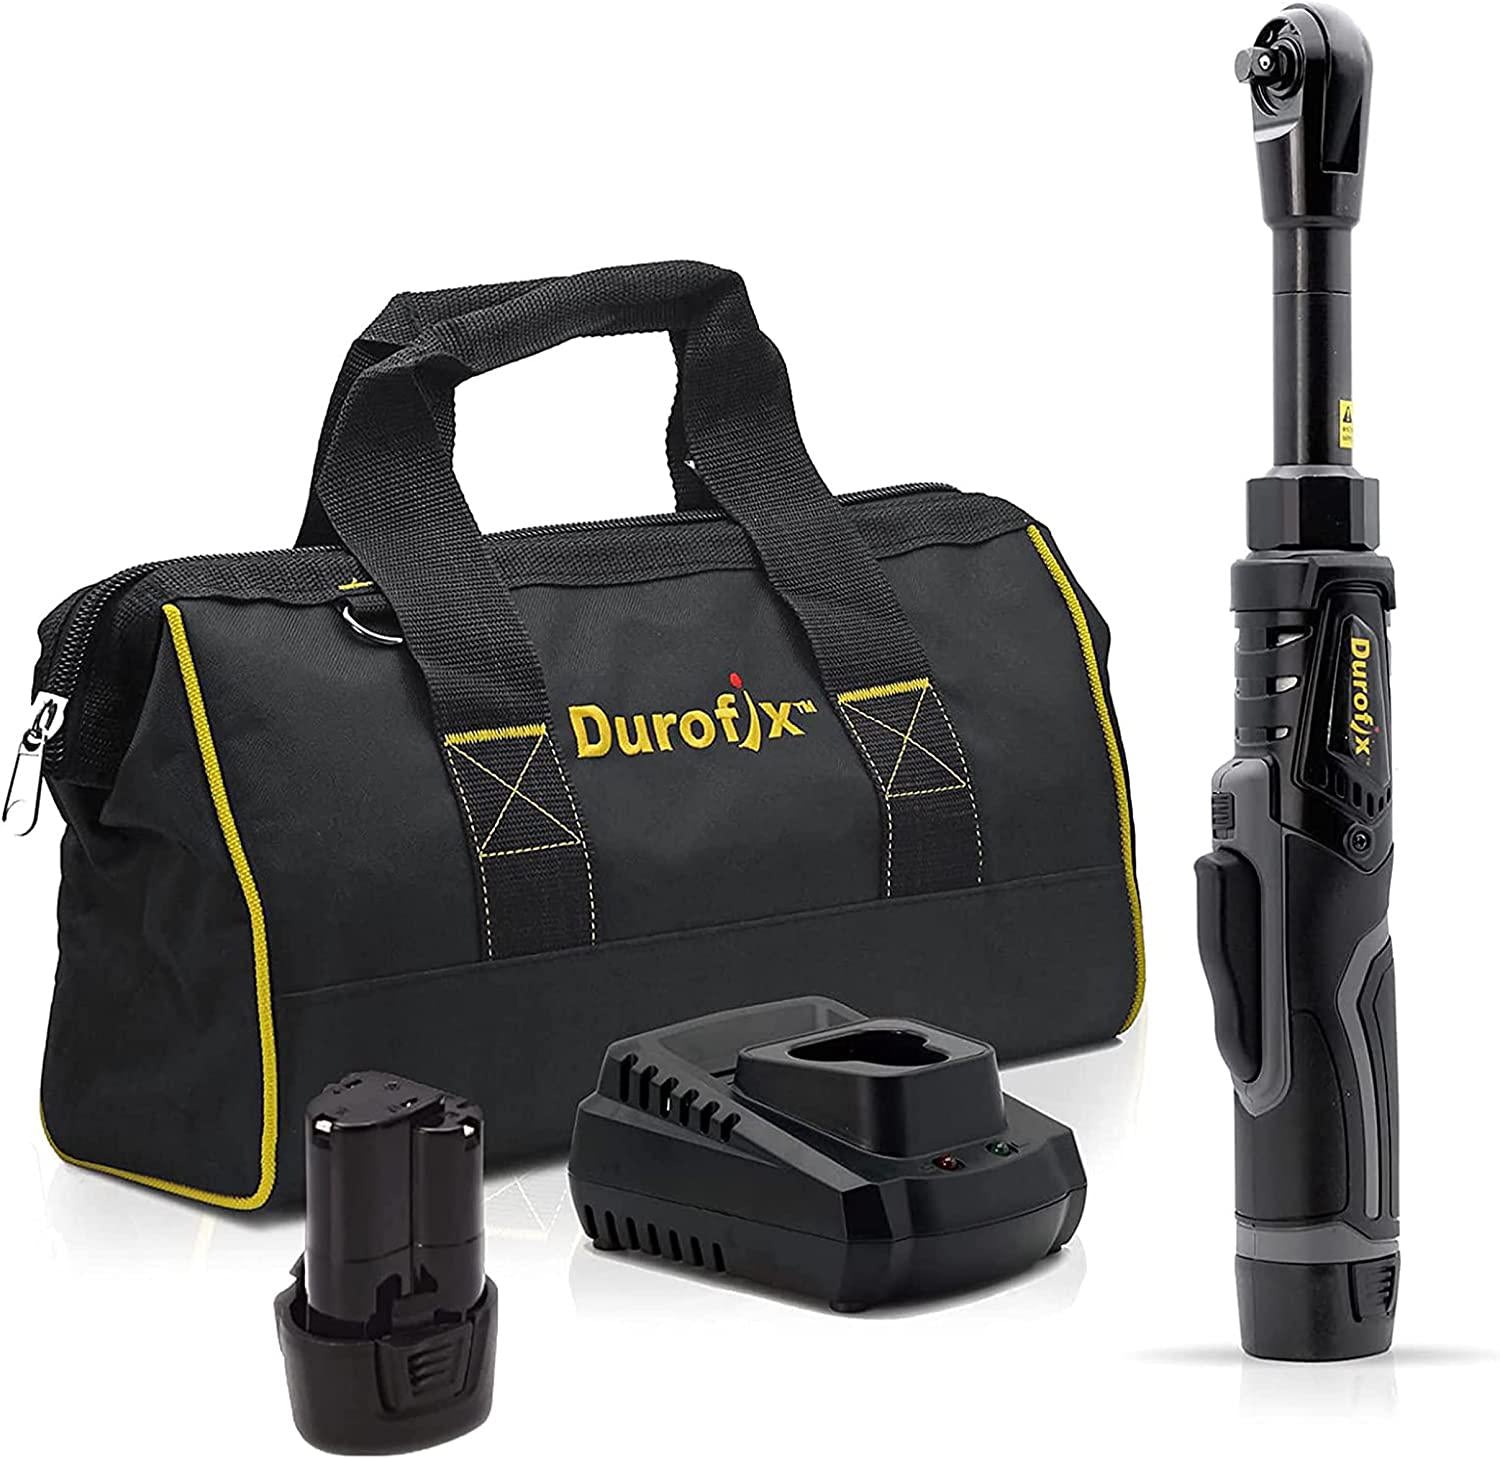 Durofix, Durofix RW1216-3P2G G12 Series 3/8 Extended Ratchet Wrench 10.8V Li-ion Cordless Electric Power Tool Kit with x2 Batteries, Charger and Canvas Bag (88 Nm Fastening Torque)